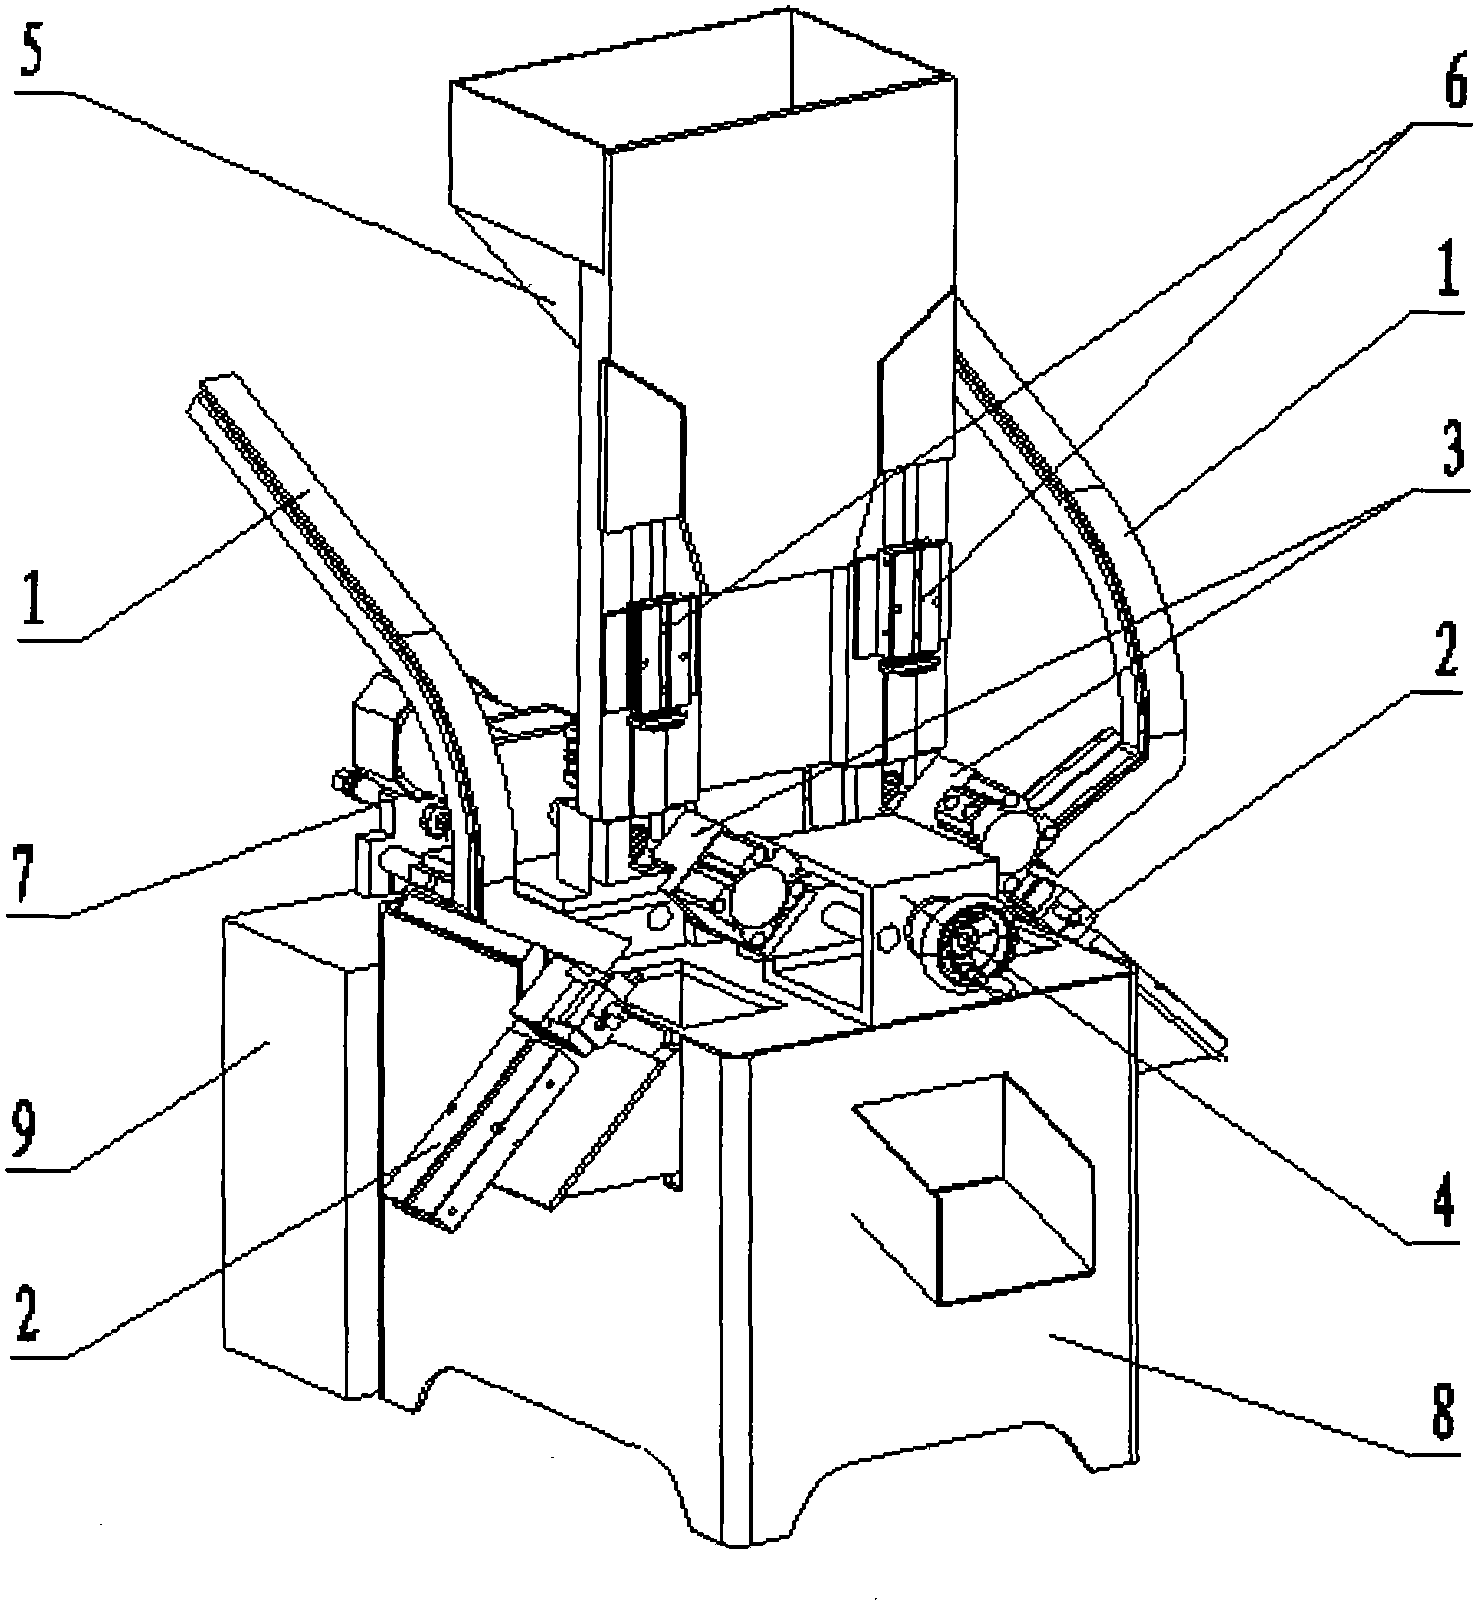 Bolt and nut automated assembly machine